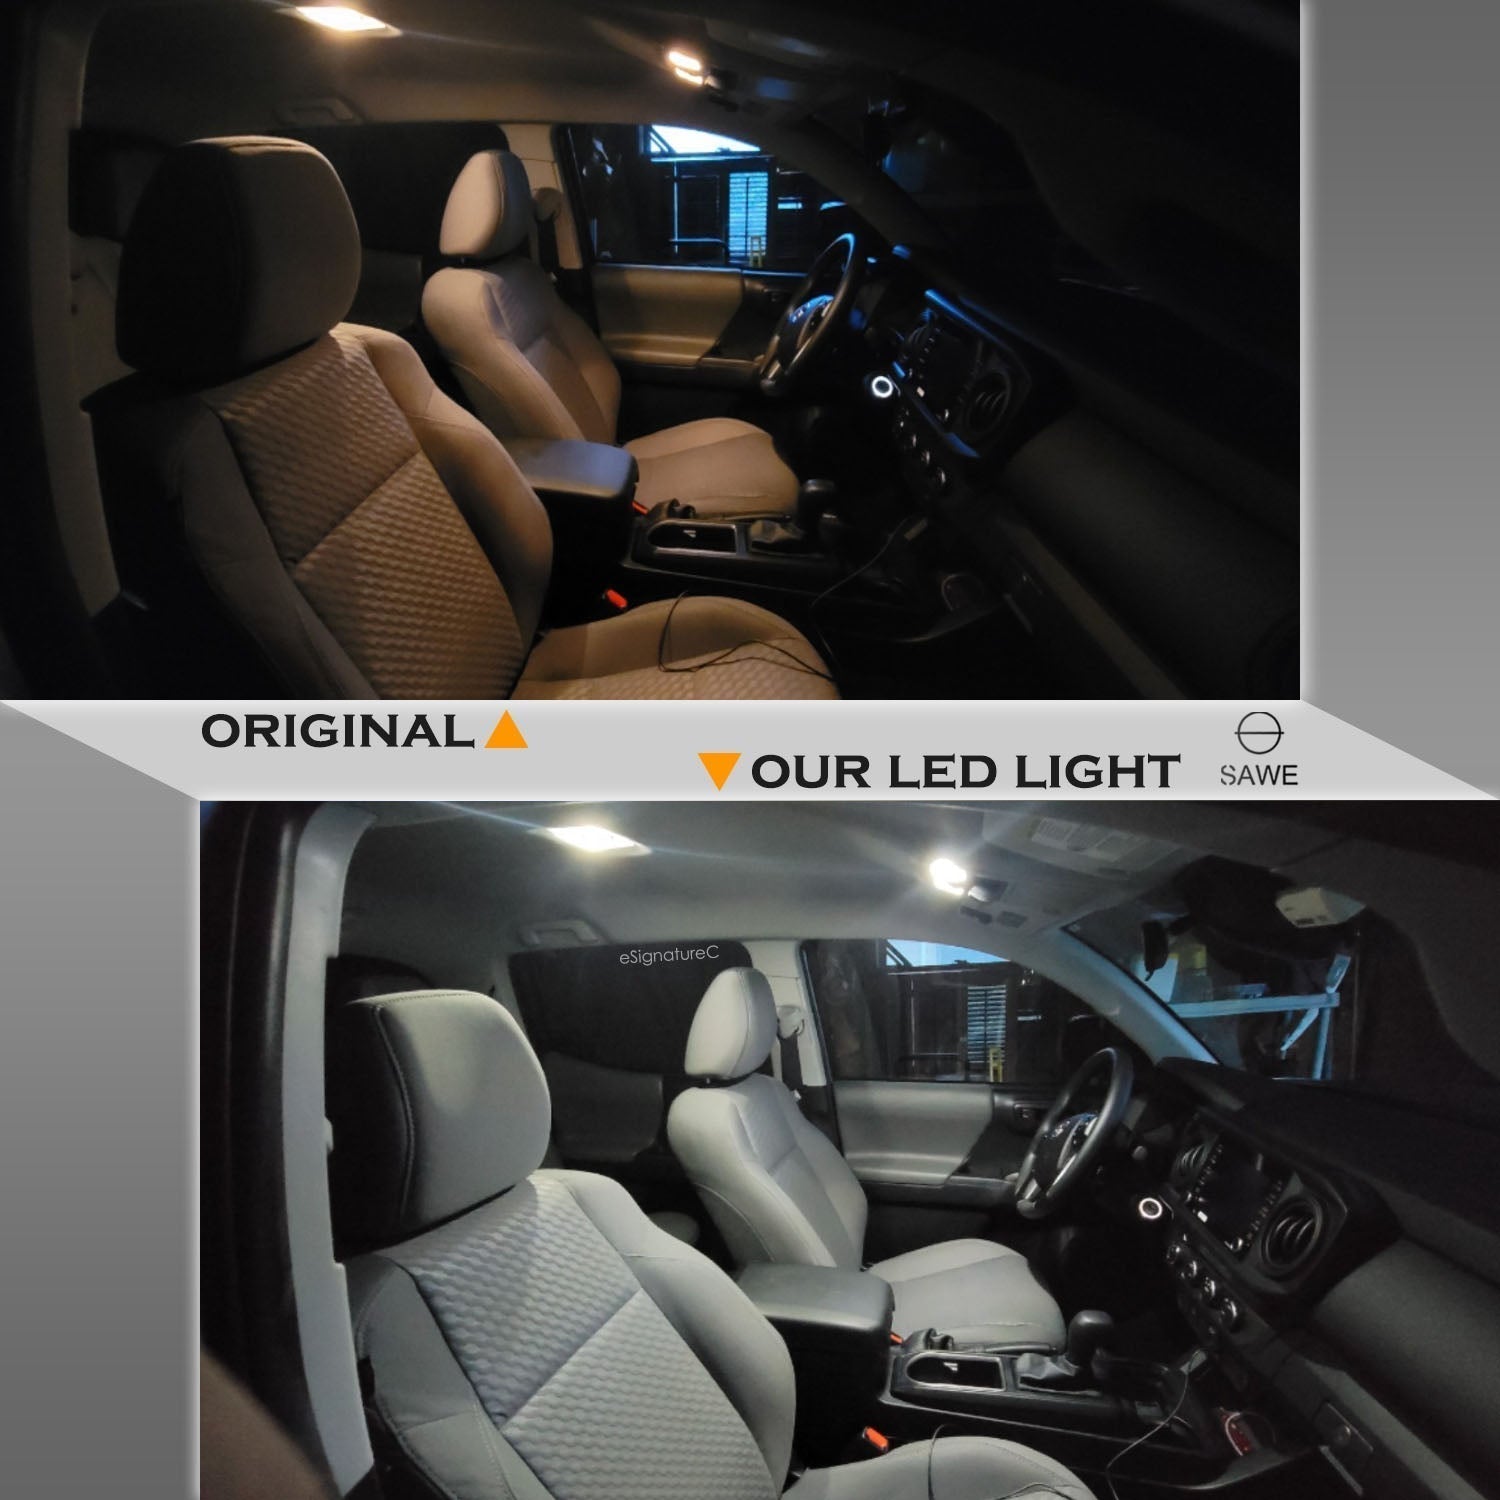 For Cadillac CTS Interior LED Lights - Dome & Map Light Bulbs Package Kit for 2003 - 2007 - White